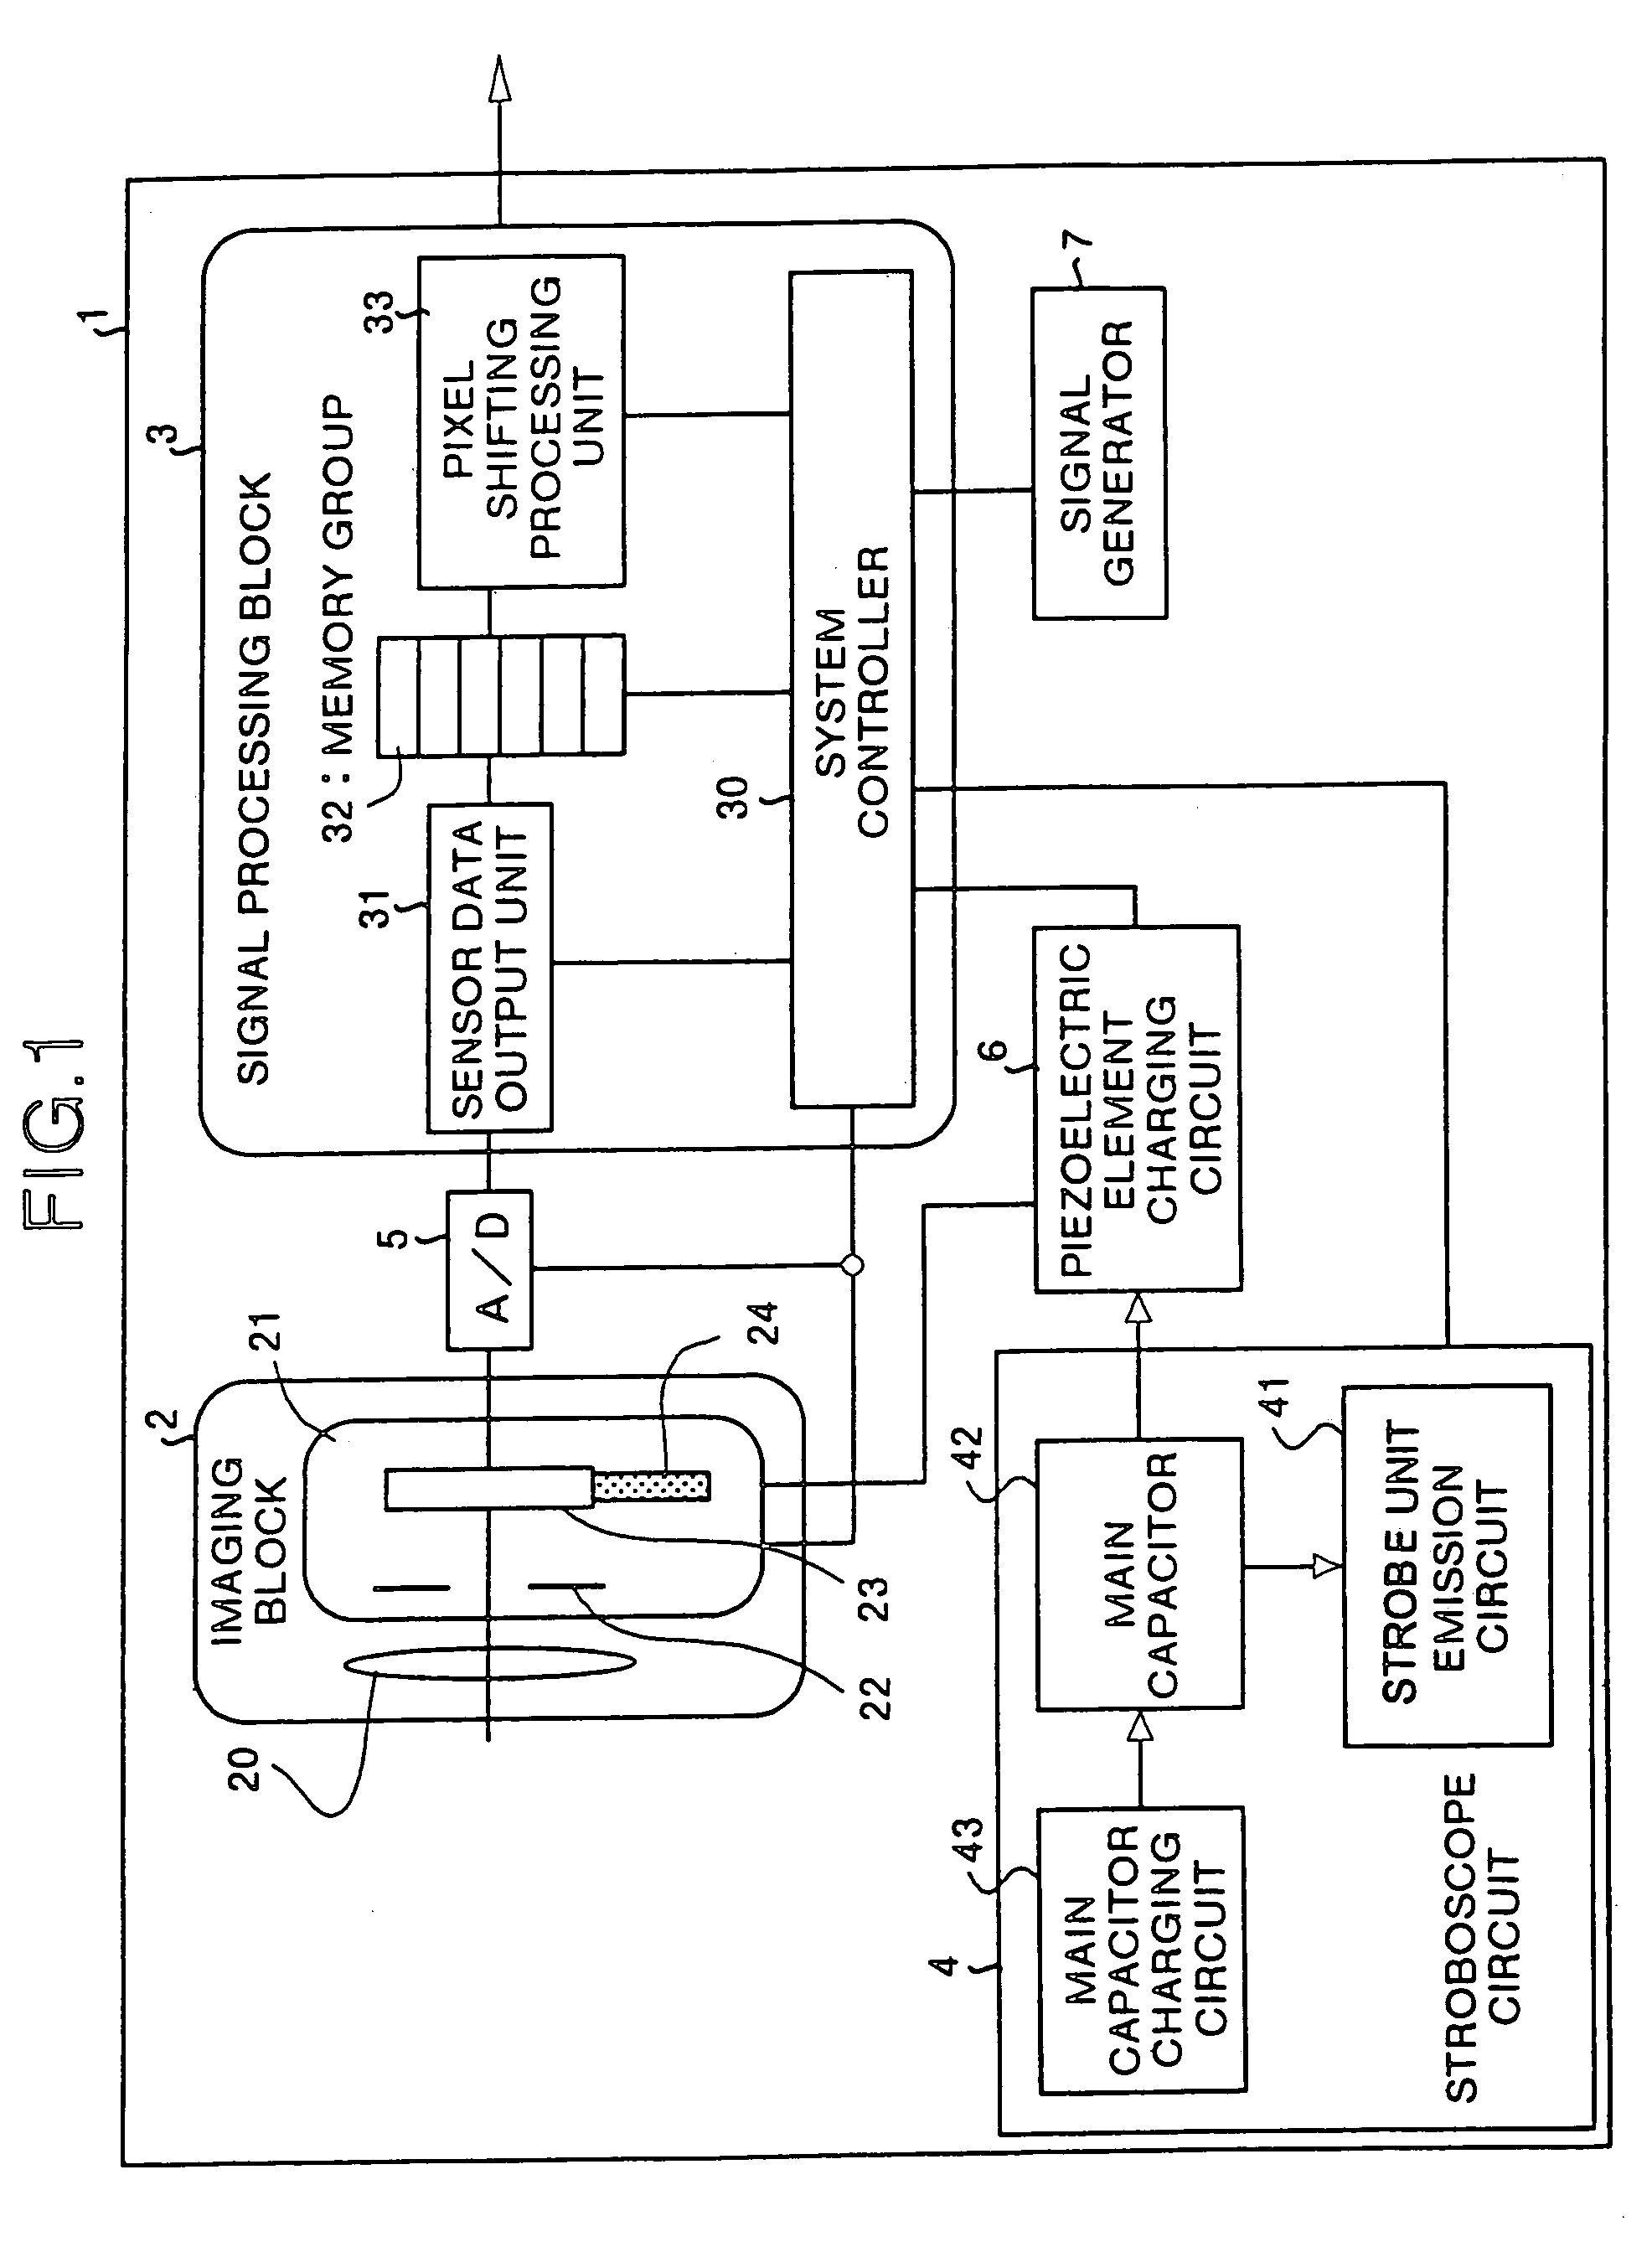 Digital camera with power supply for piezoelectric element and stroboscope circuit